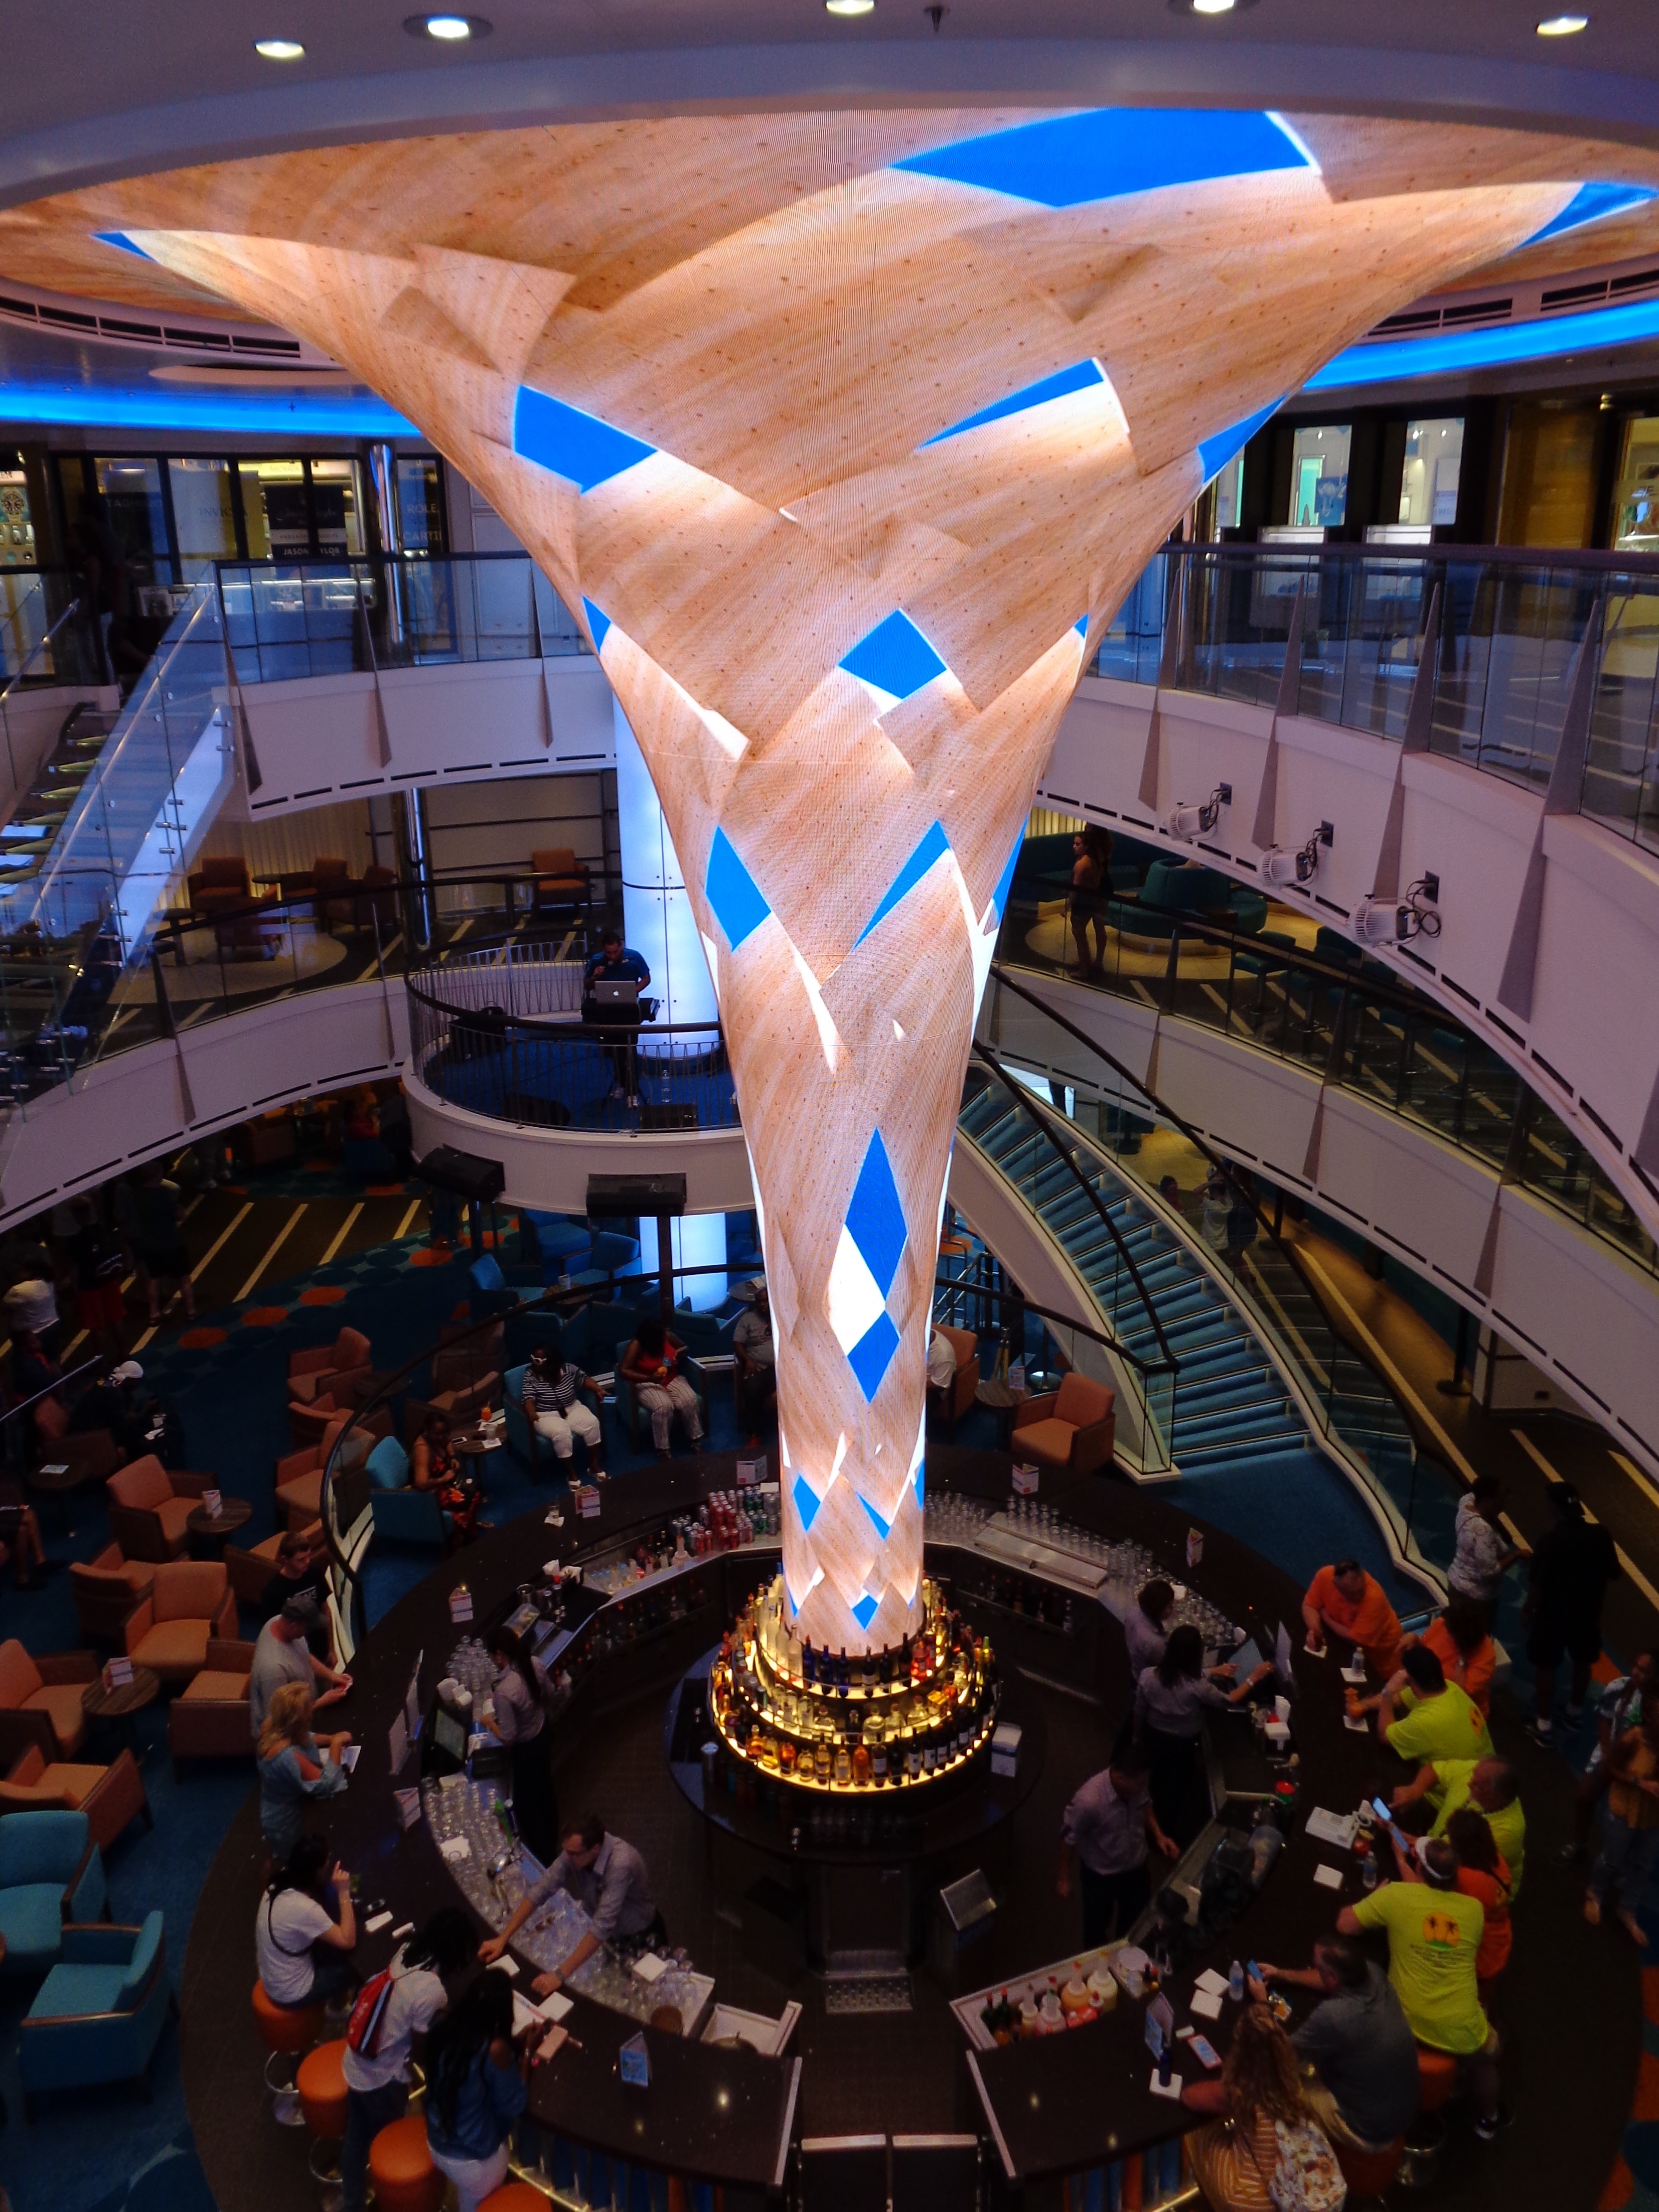 Hidden Decks and Busy Atriums on Embarkation Day